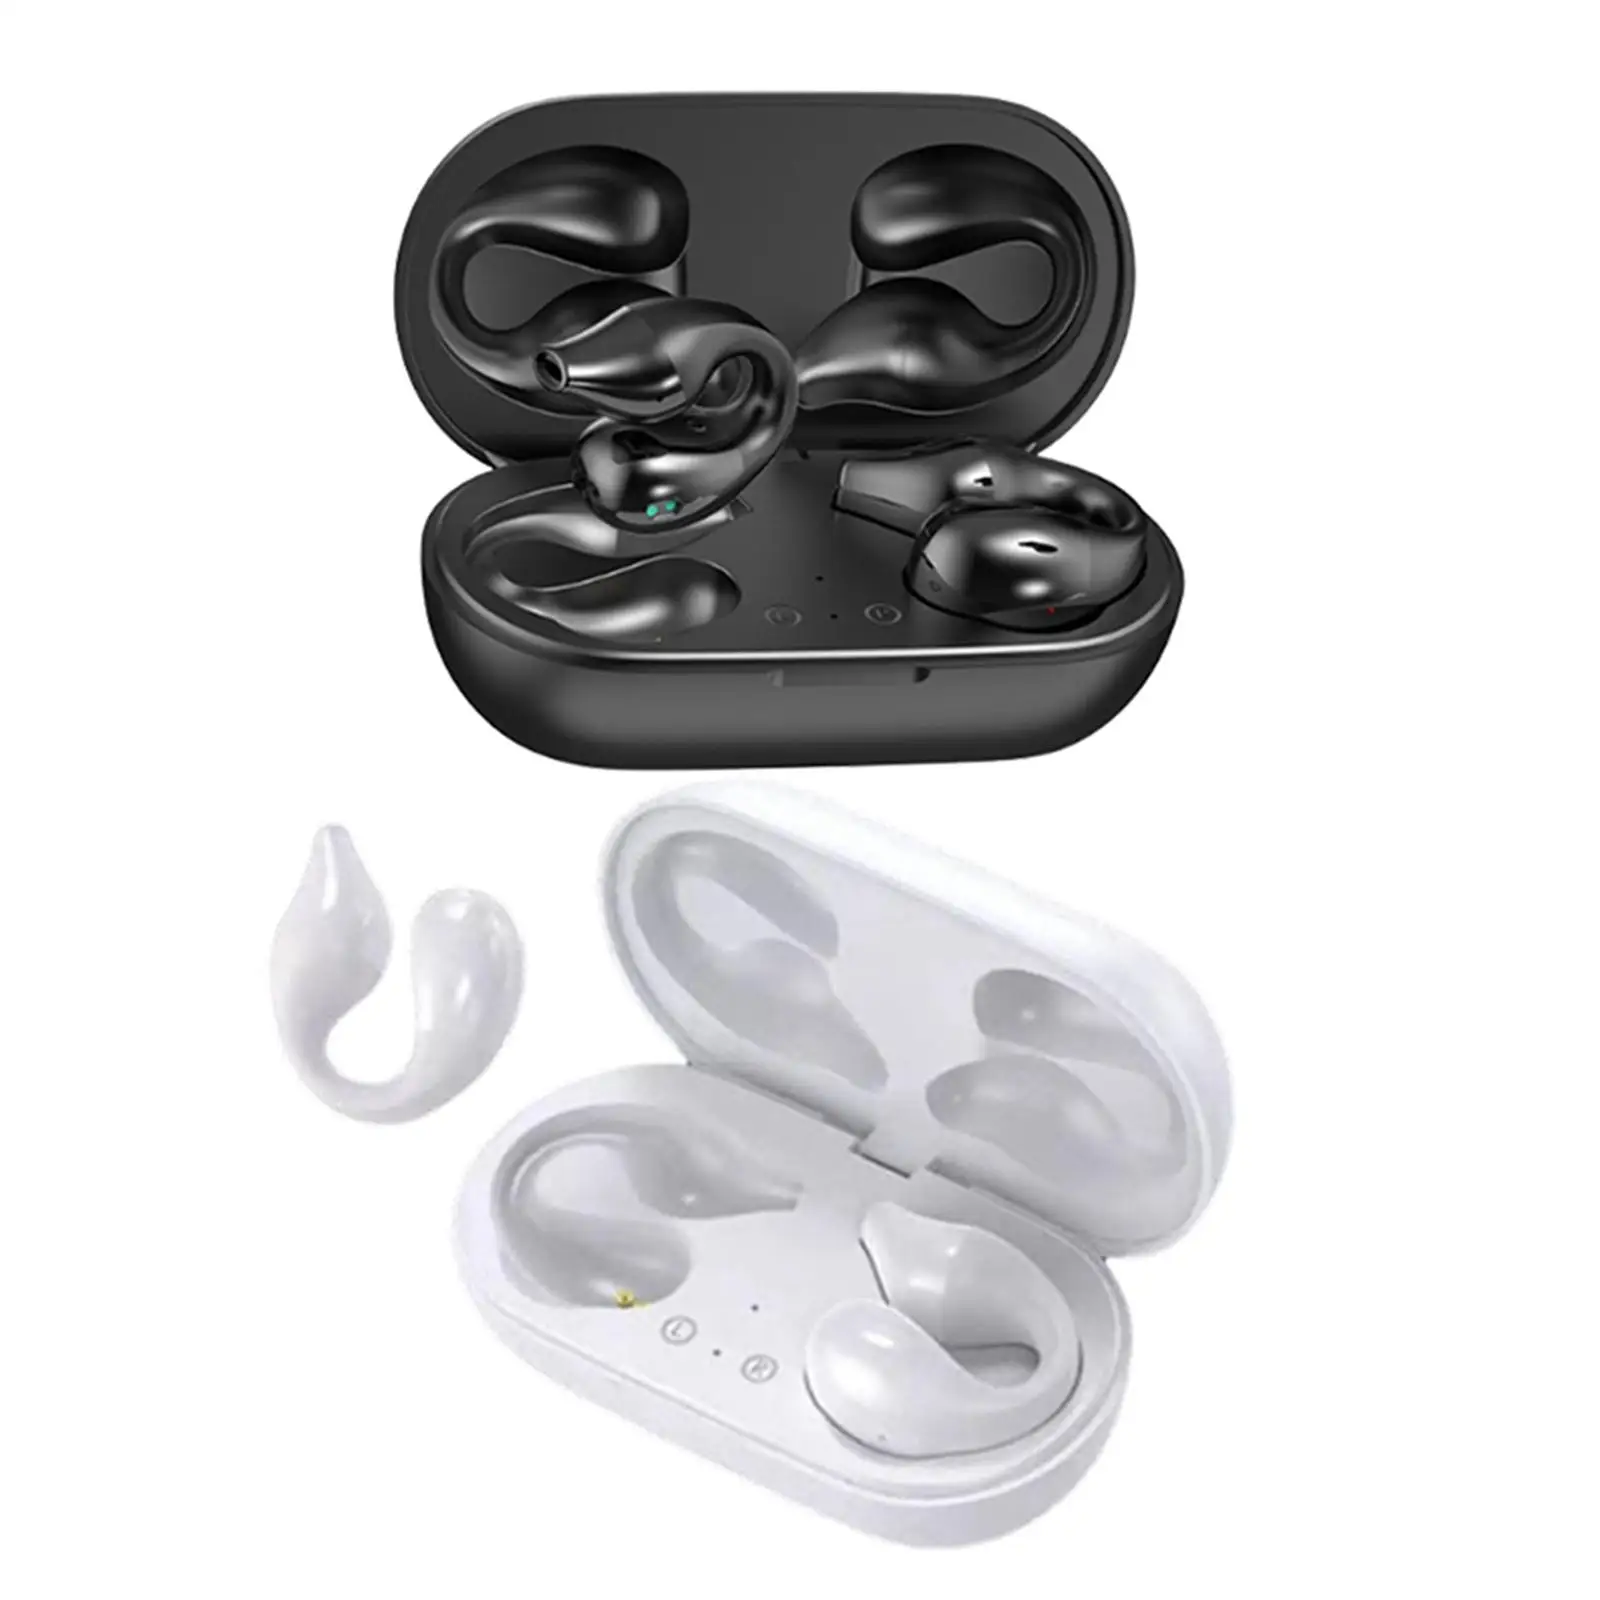 Air Conduction Headphones Sports Earphones BT 5.2 Over Ear Waterproof Wireless Earbuds for Games Fitness Workout Jogging Yoga